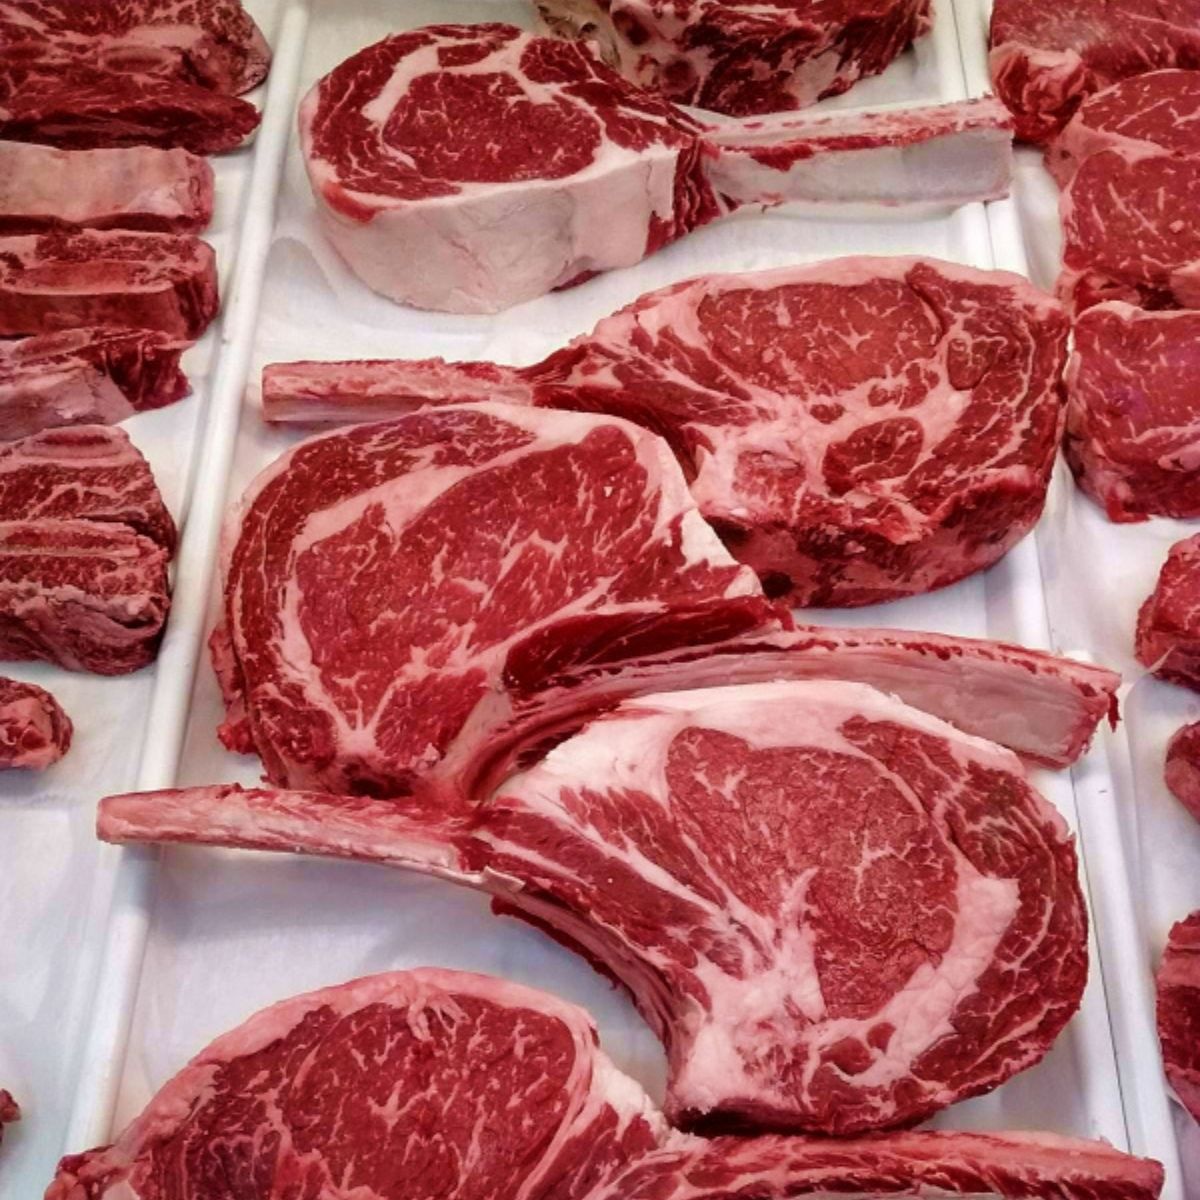 Ribeye steaks with long bones on display at a Costco store.